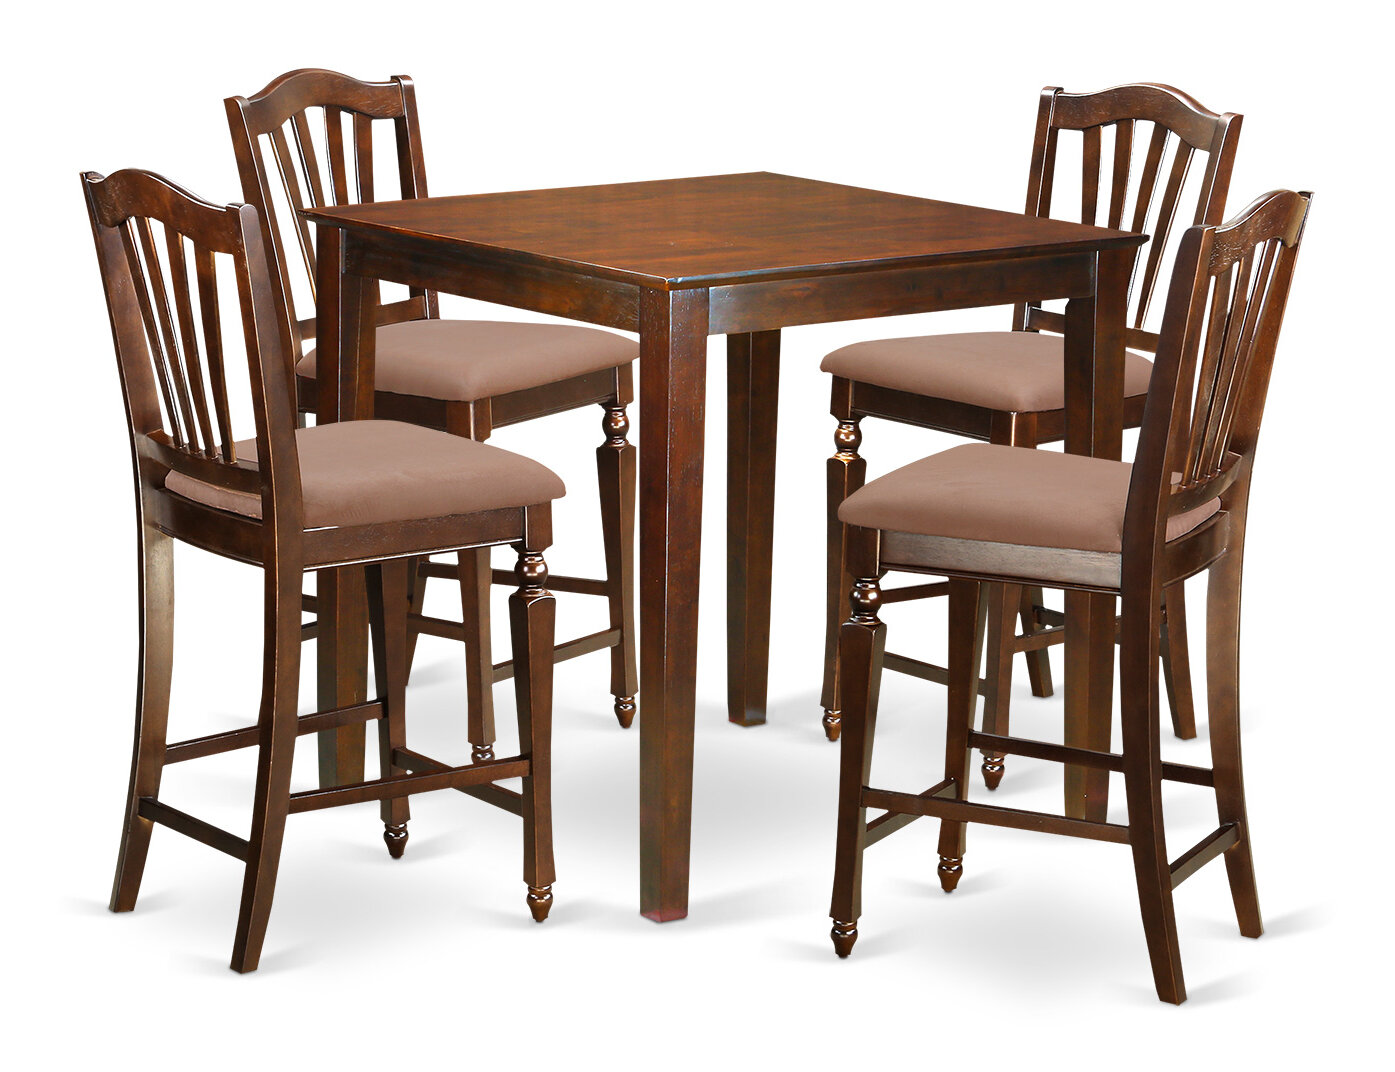 East West Furniture Vernon 5 Piece Counter Height Pub Table Set | eBay